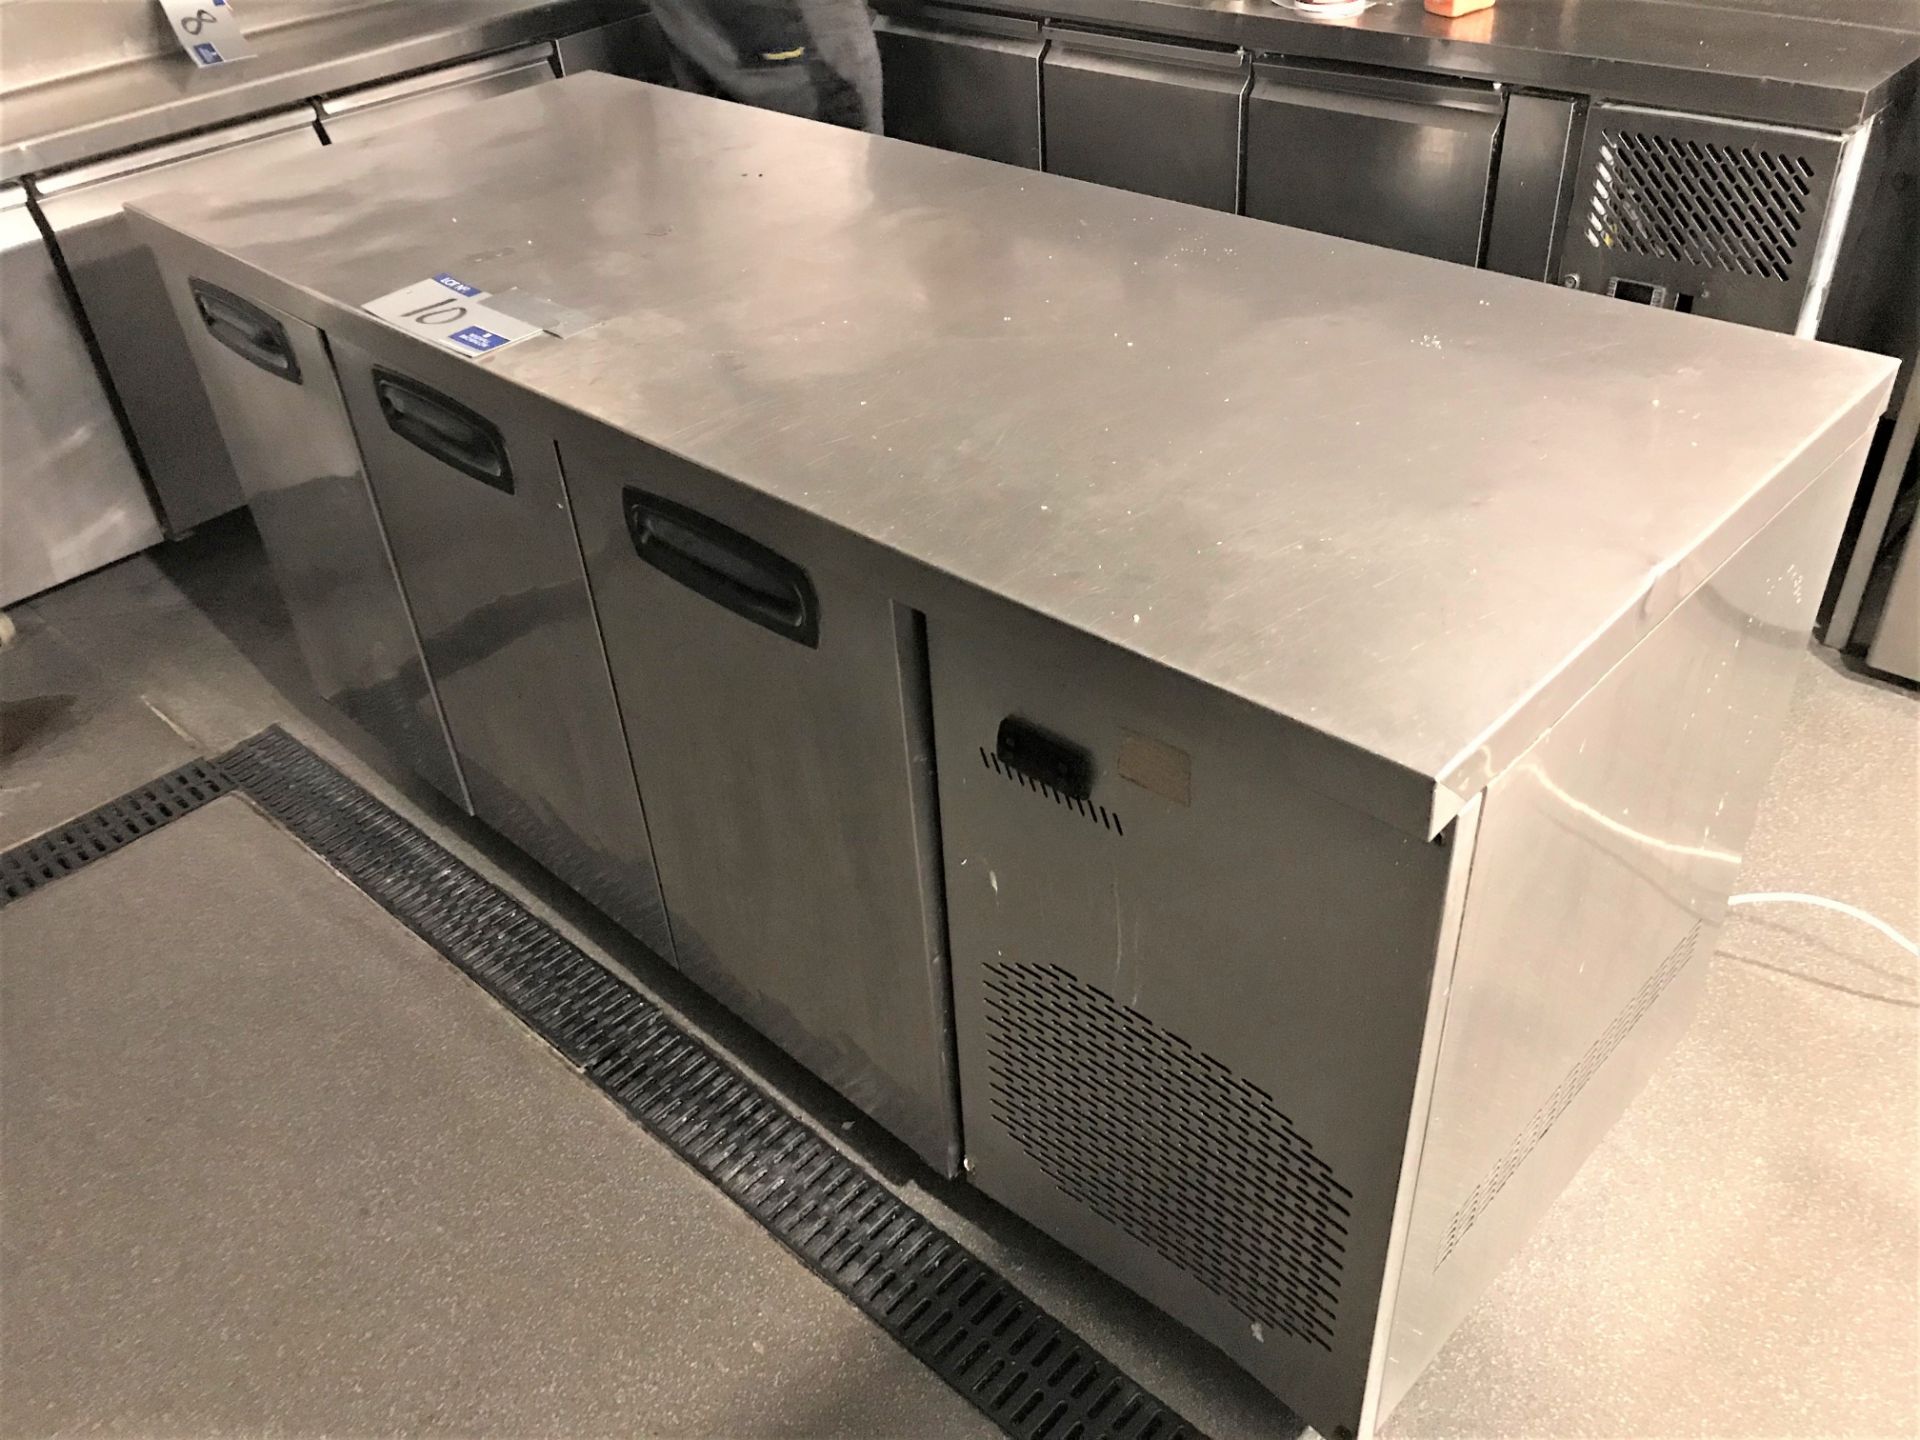 A 3 Section Mobile Stainless Steel Food Preparatio